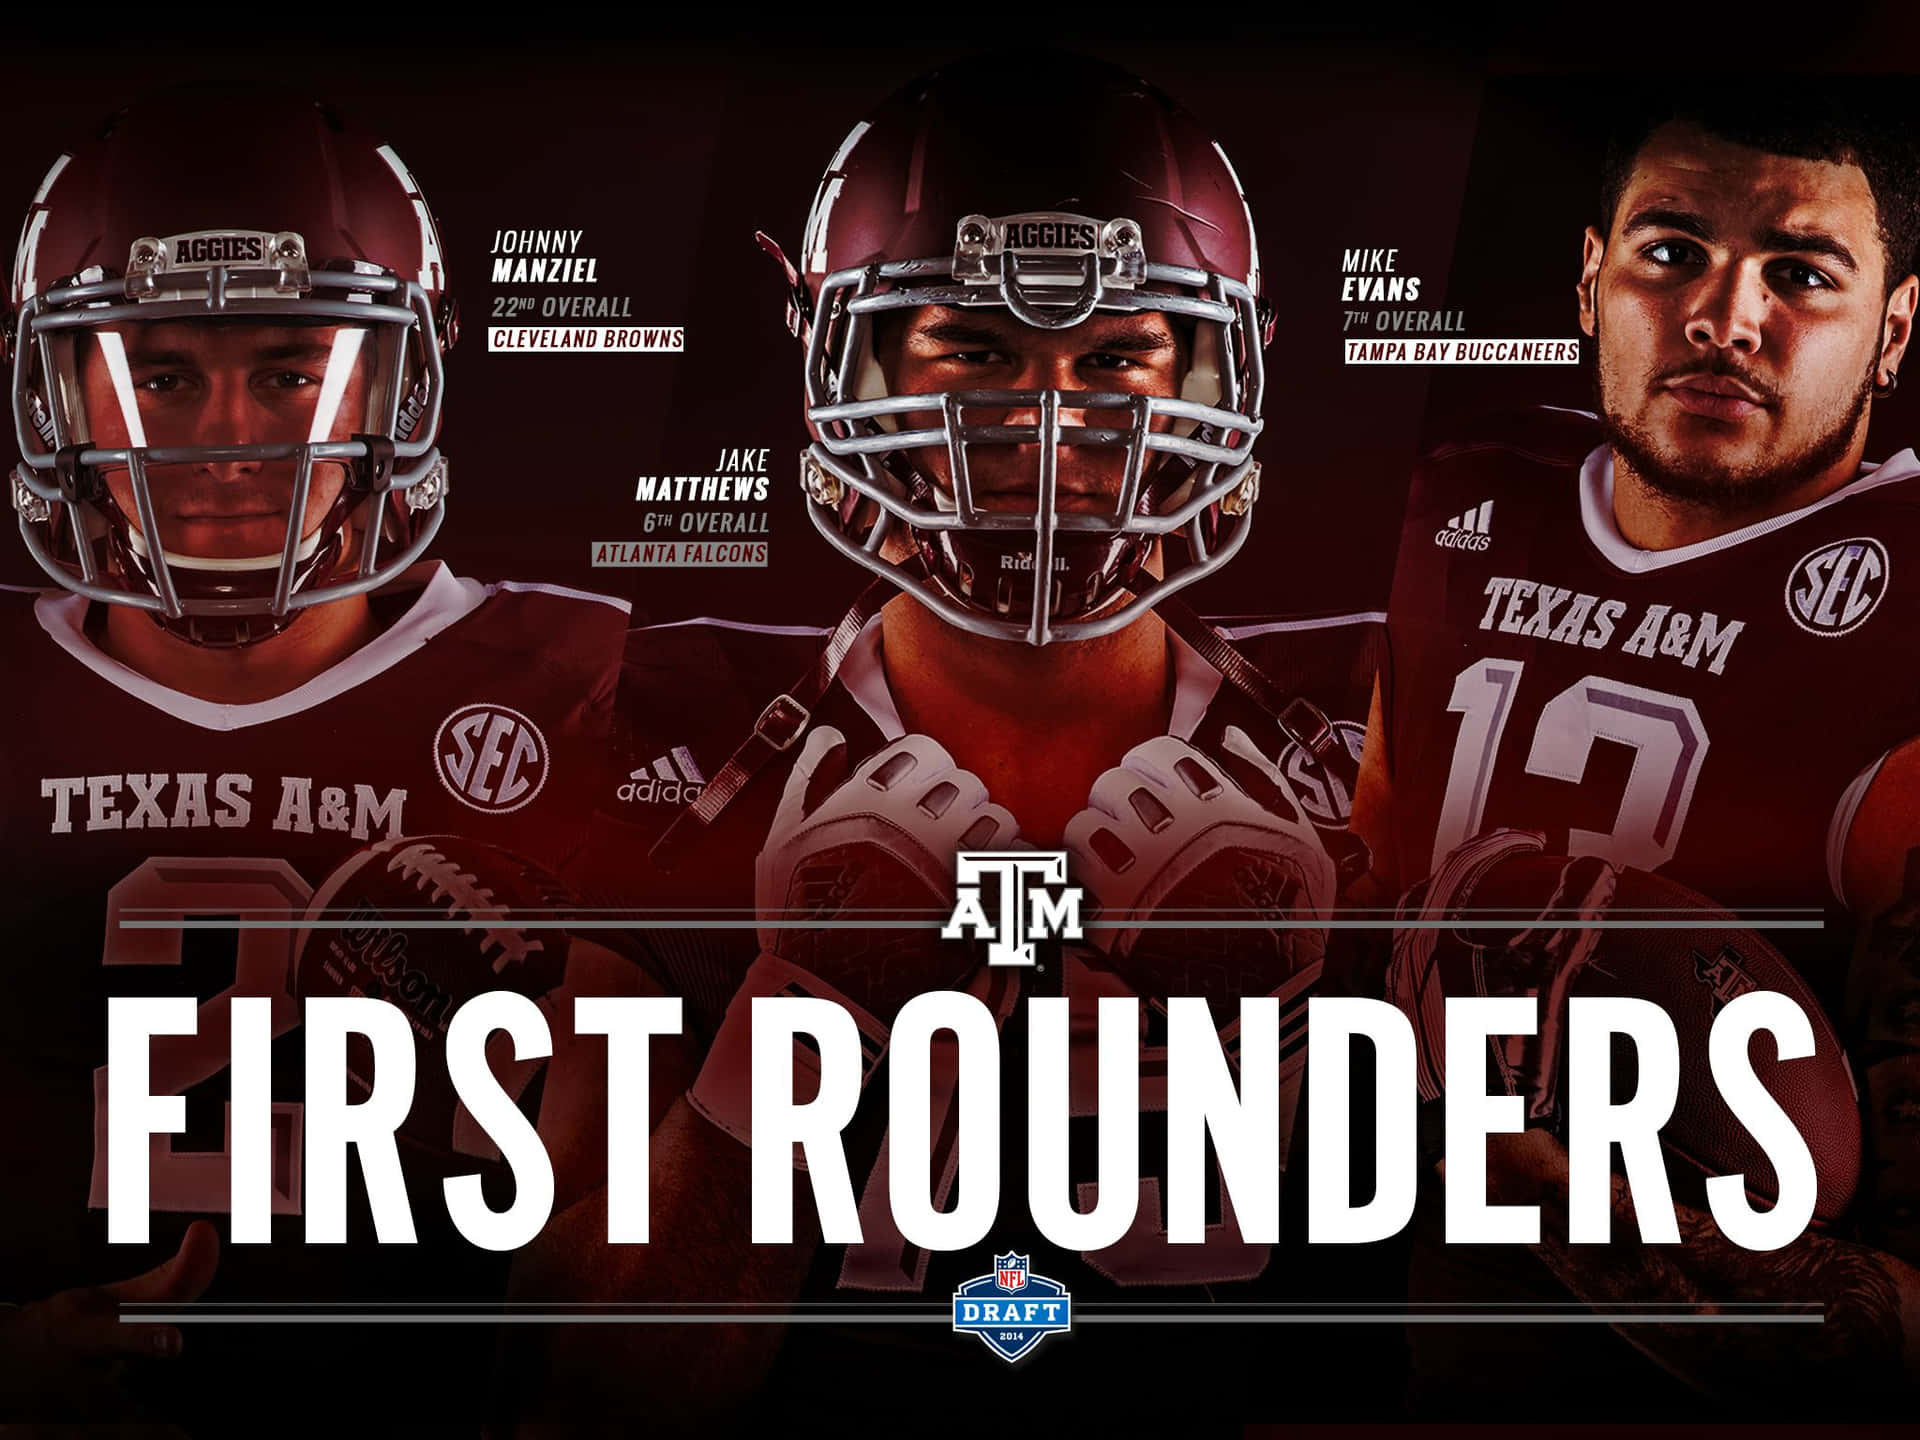 Texas Am Players In Uniform With The Words First Rounders Wallpaper